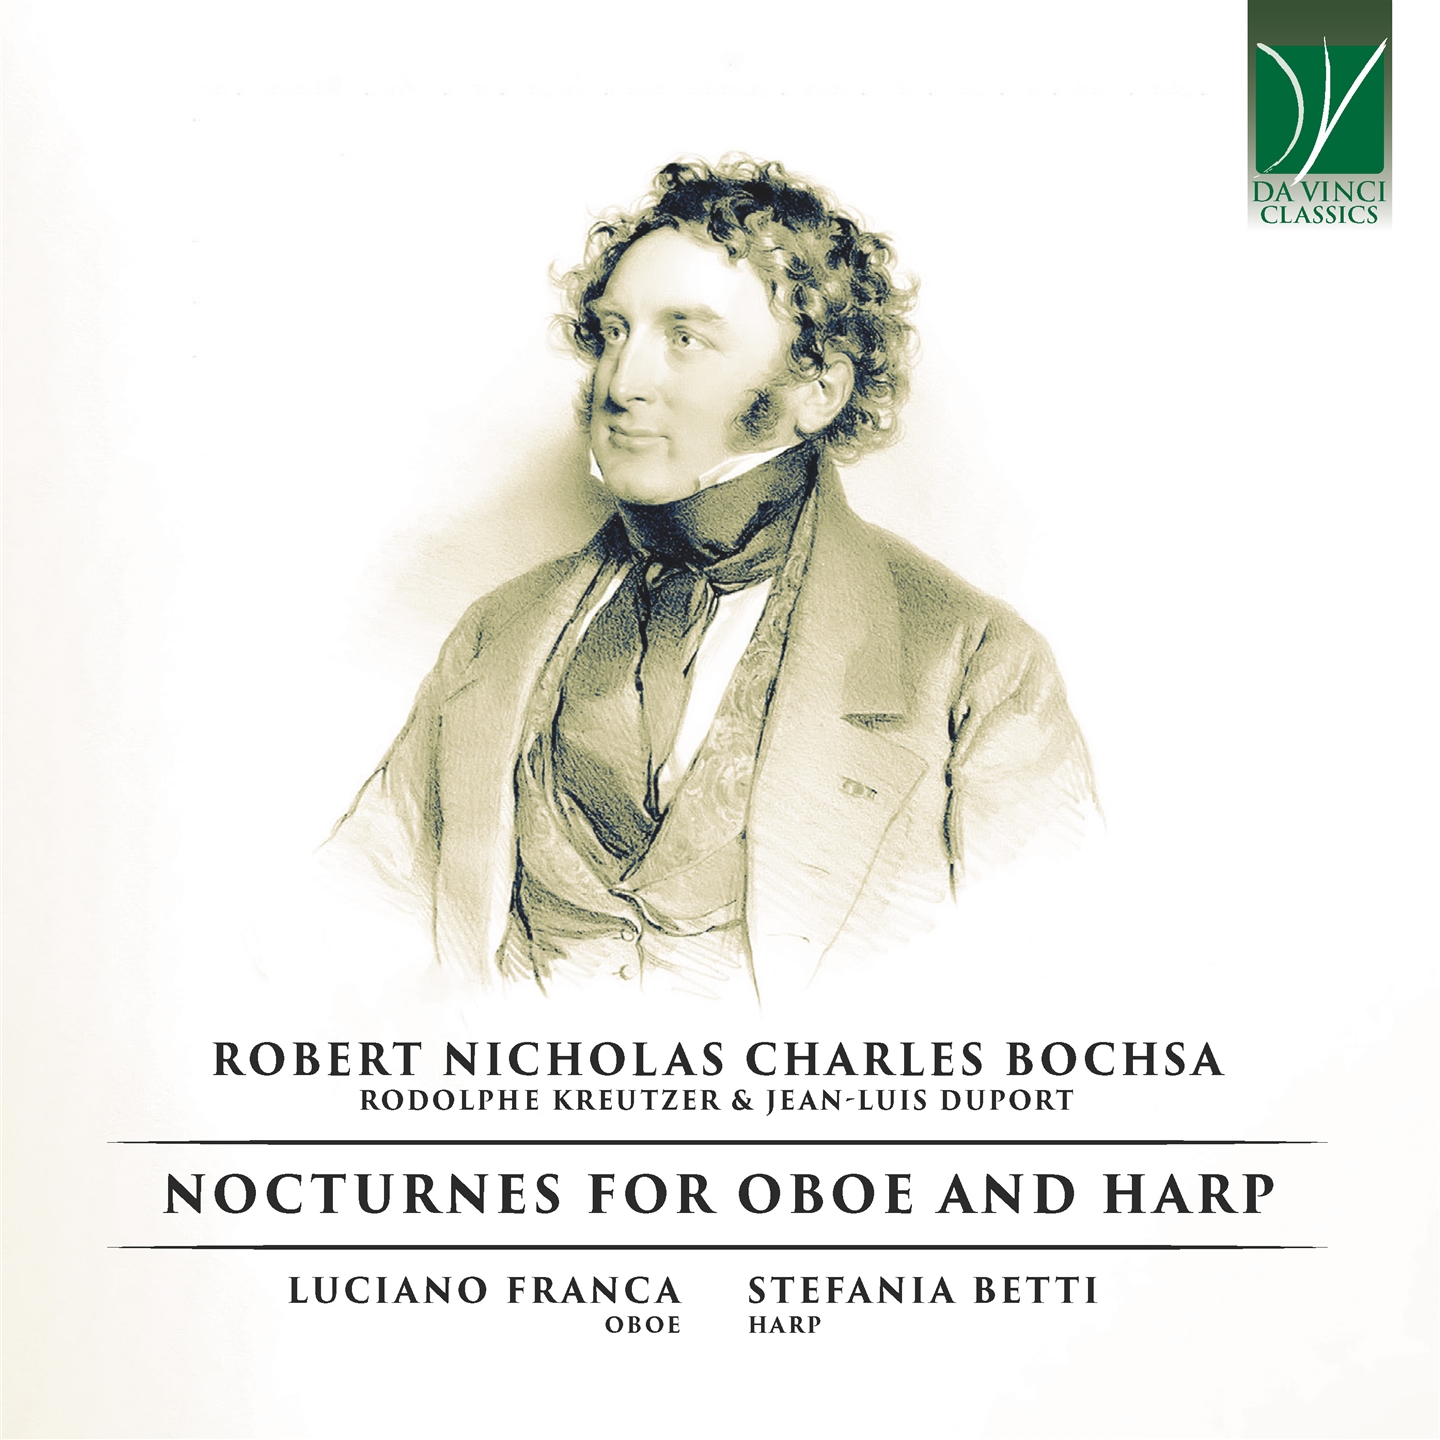 ROBERT NICHOLAS CHARLES BOCHSA: NOCTURNES FOR OBOE AND HARP